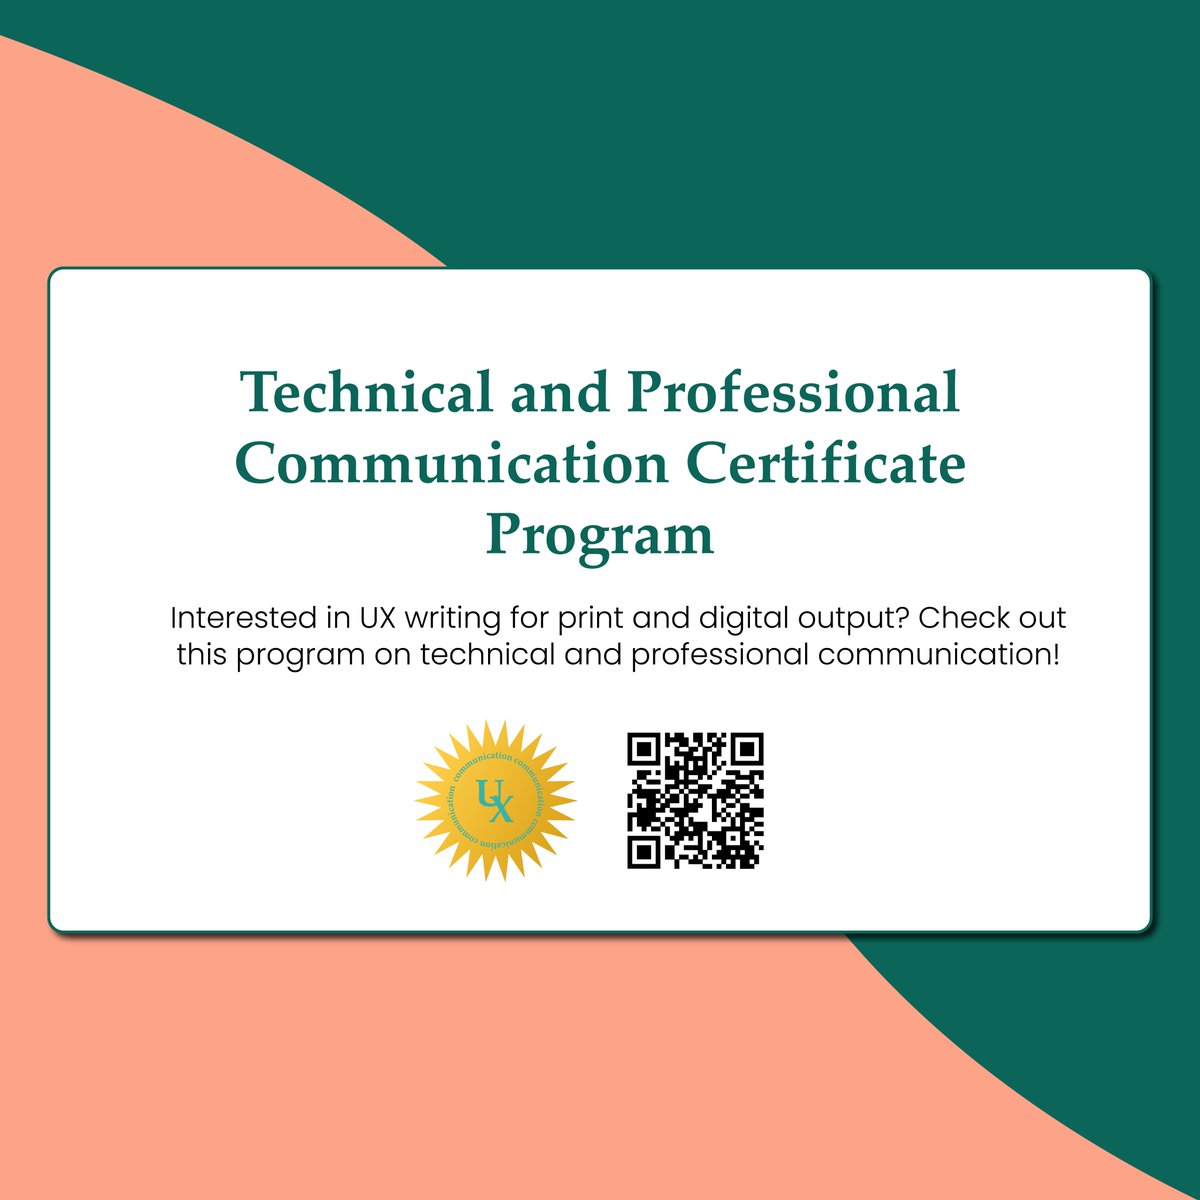 Attention UX/UI concentrations! Looking to supplement your GrC career with UX writing? Check out this program on technical and professional communication!
#CalPolyGrC #CalPolySLO #UXwriting